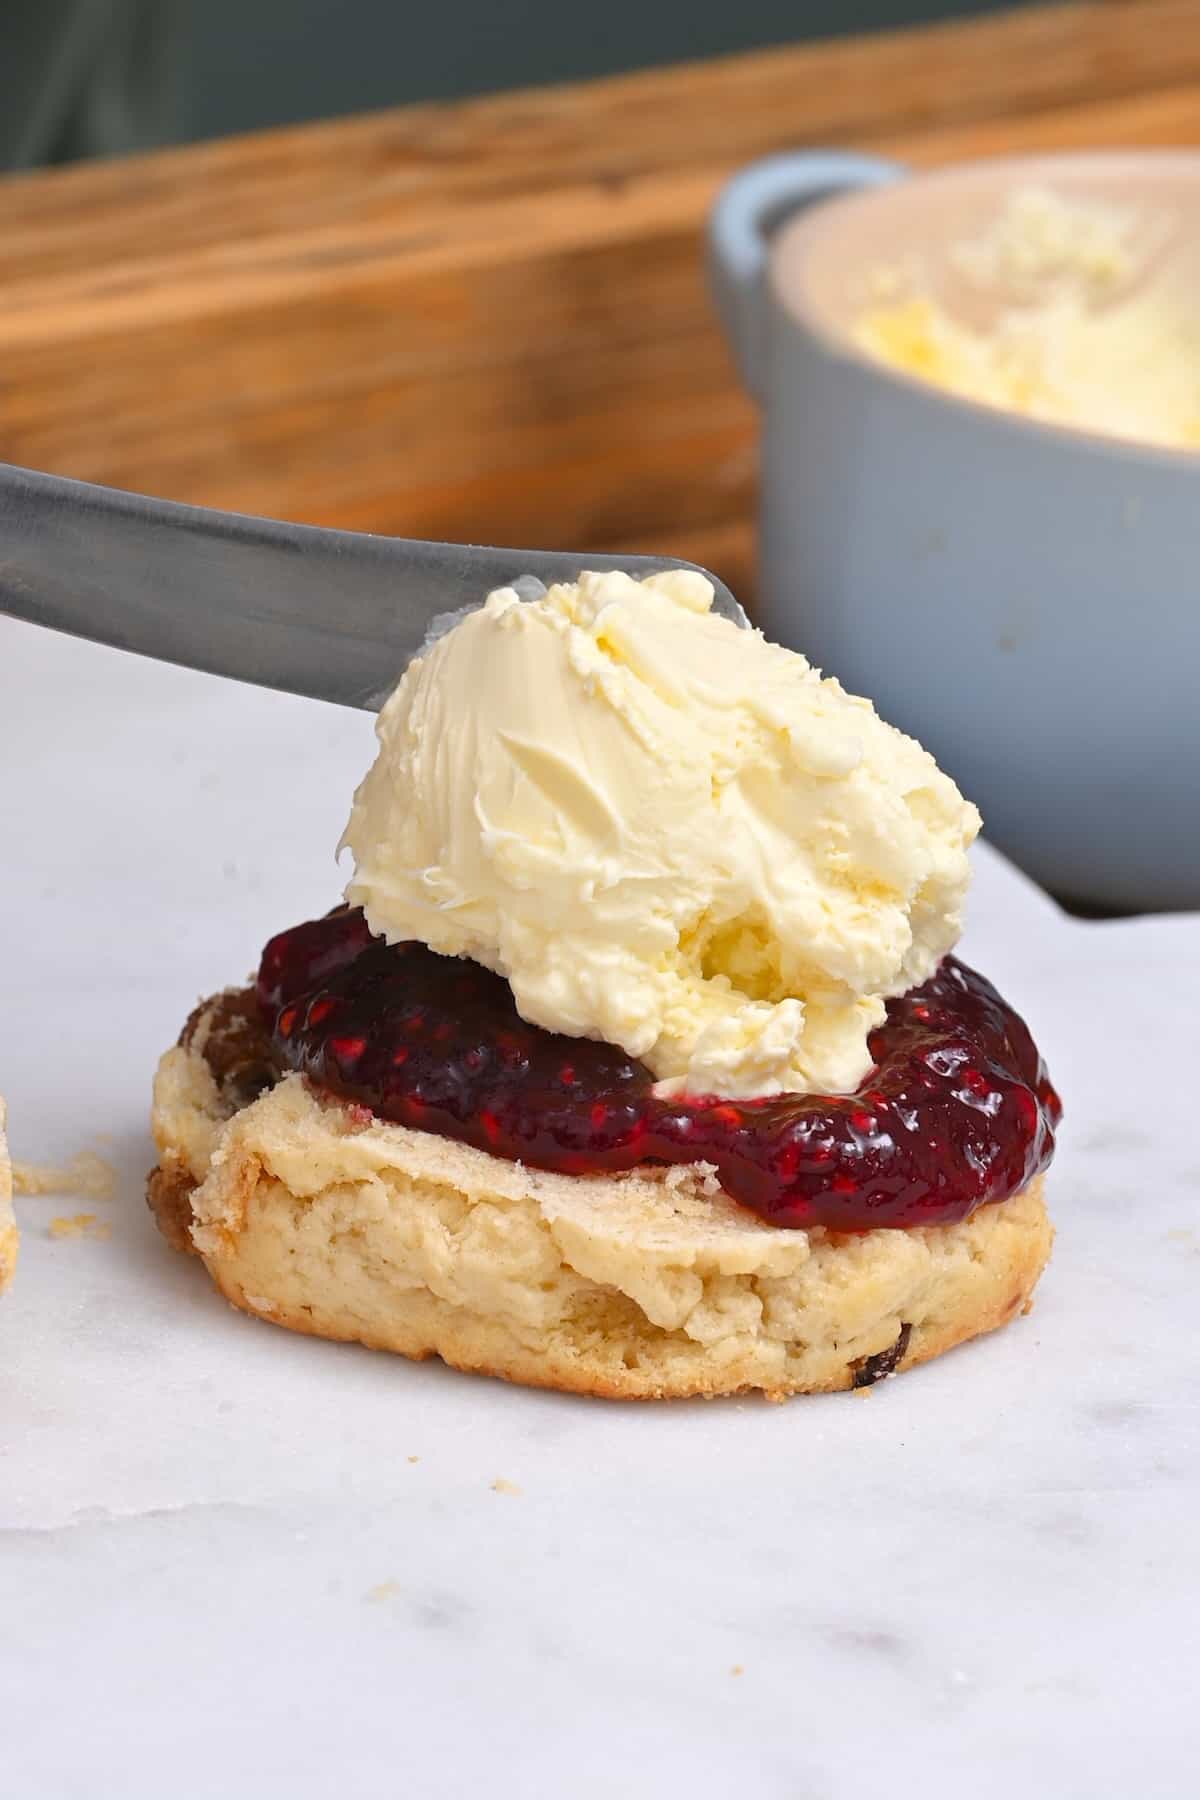 Homemade clotted cream topping raspberry jelly on a scone